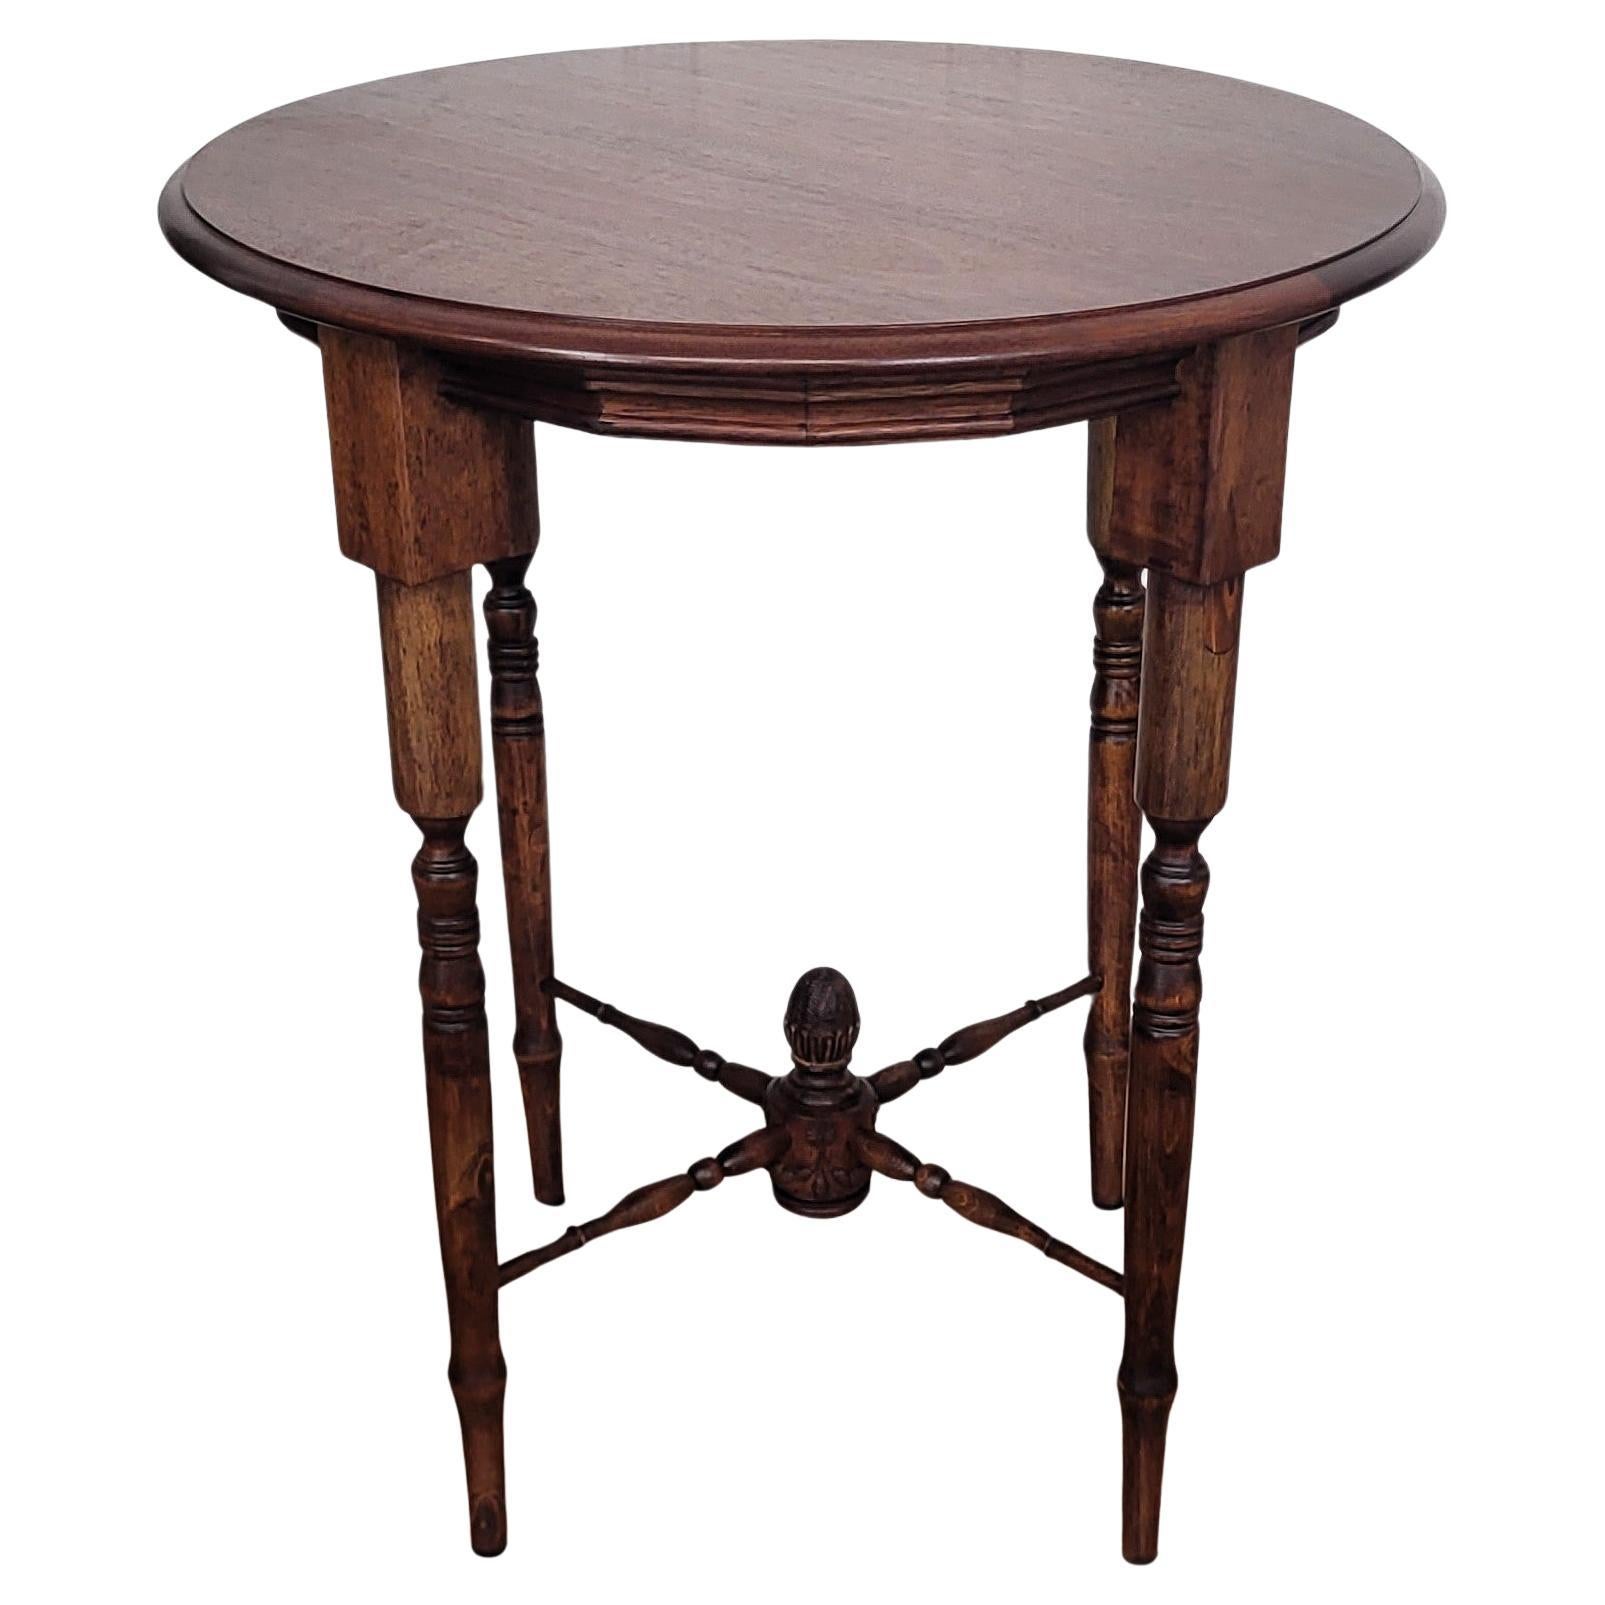 Antique Italian Round Walnut Side Table with Carved Bun Stretcher For Sale